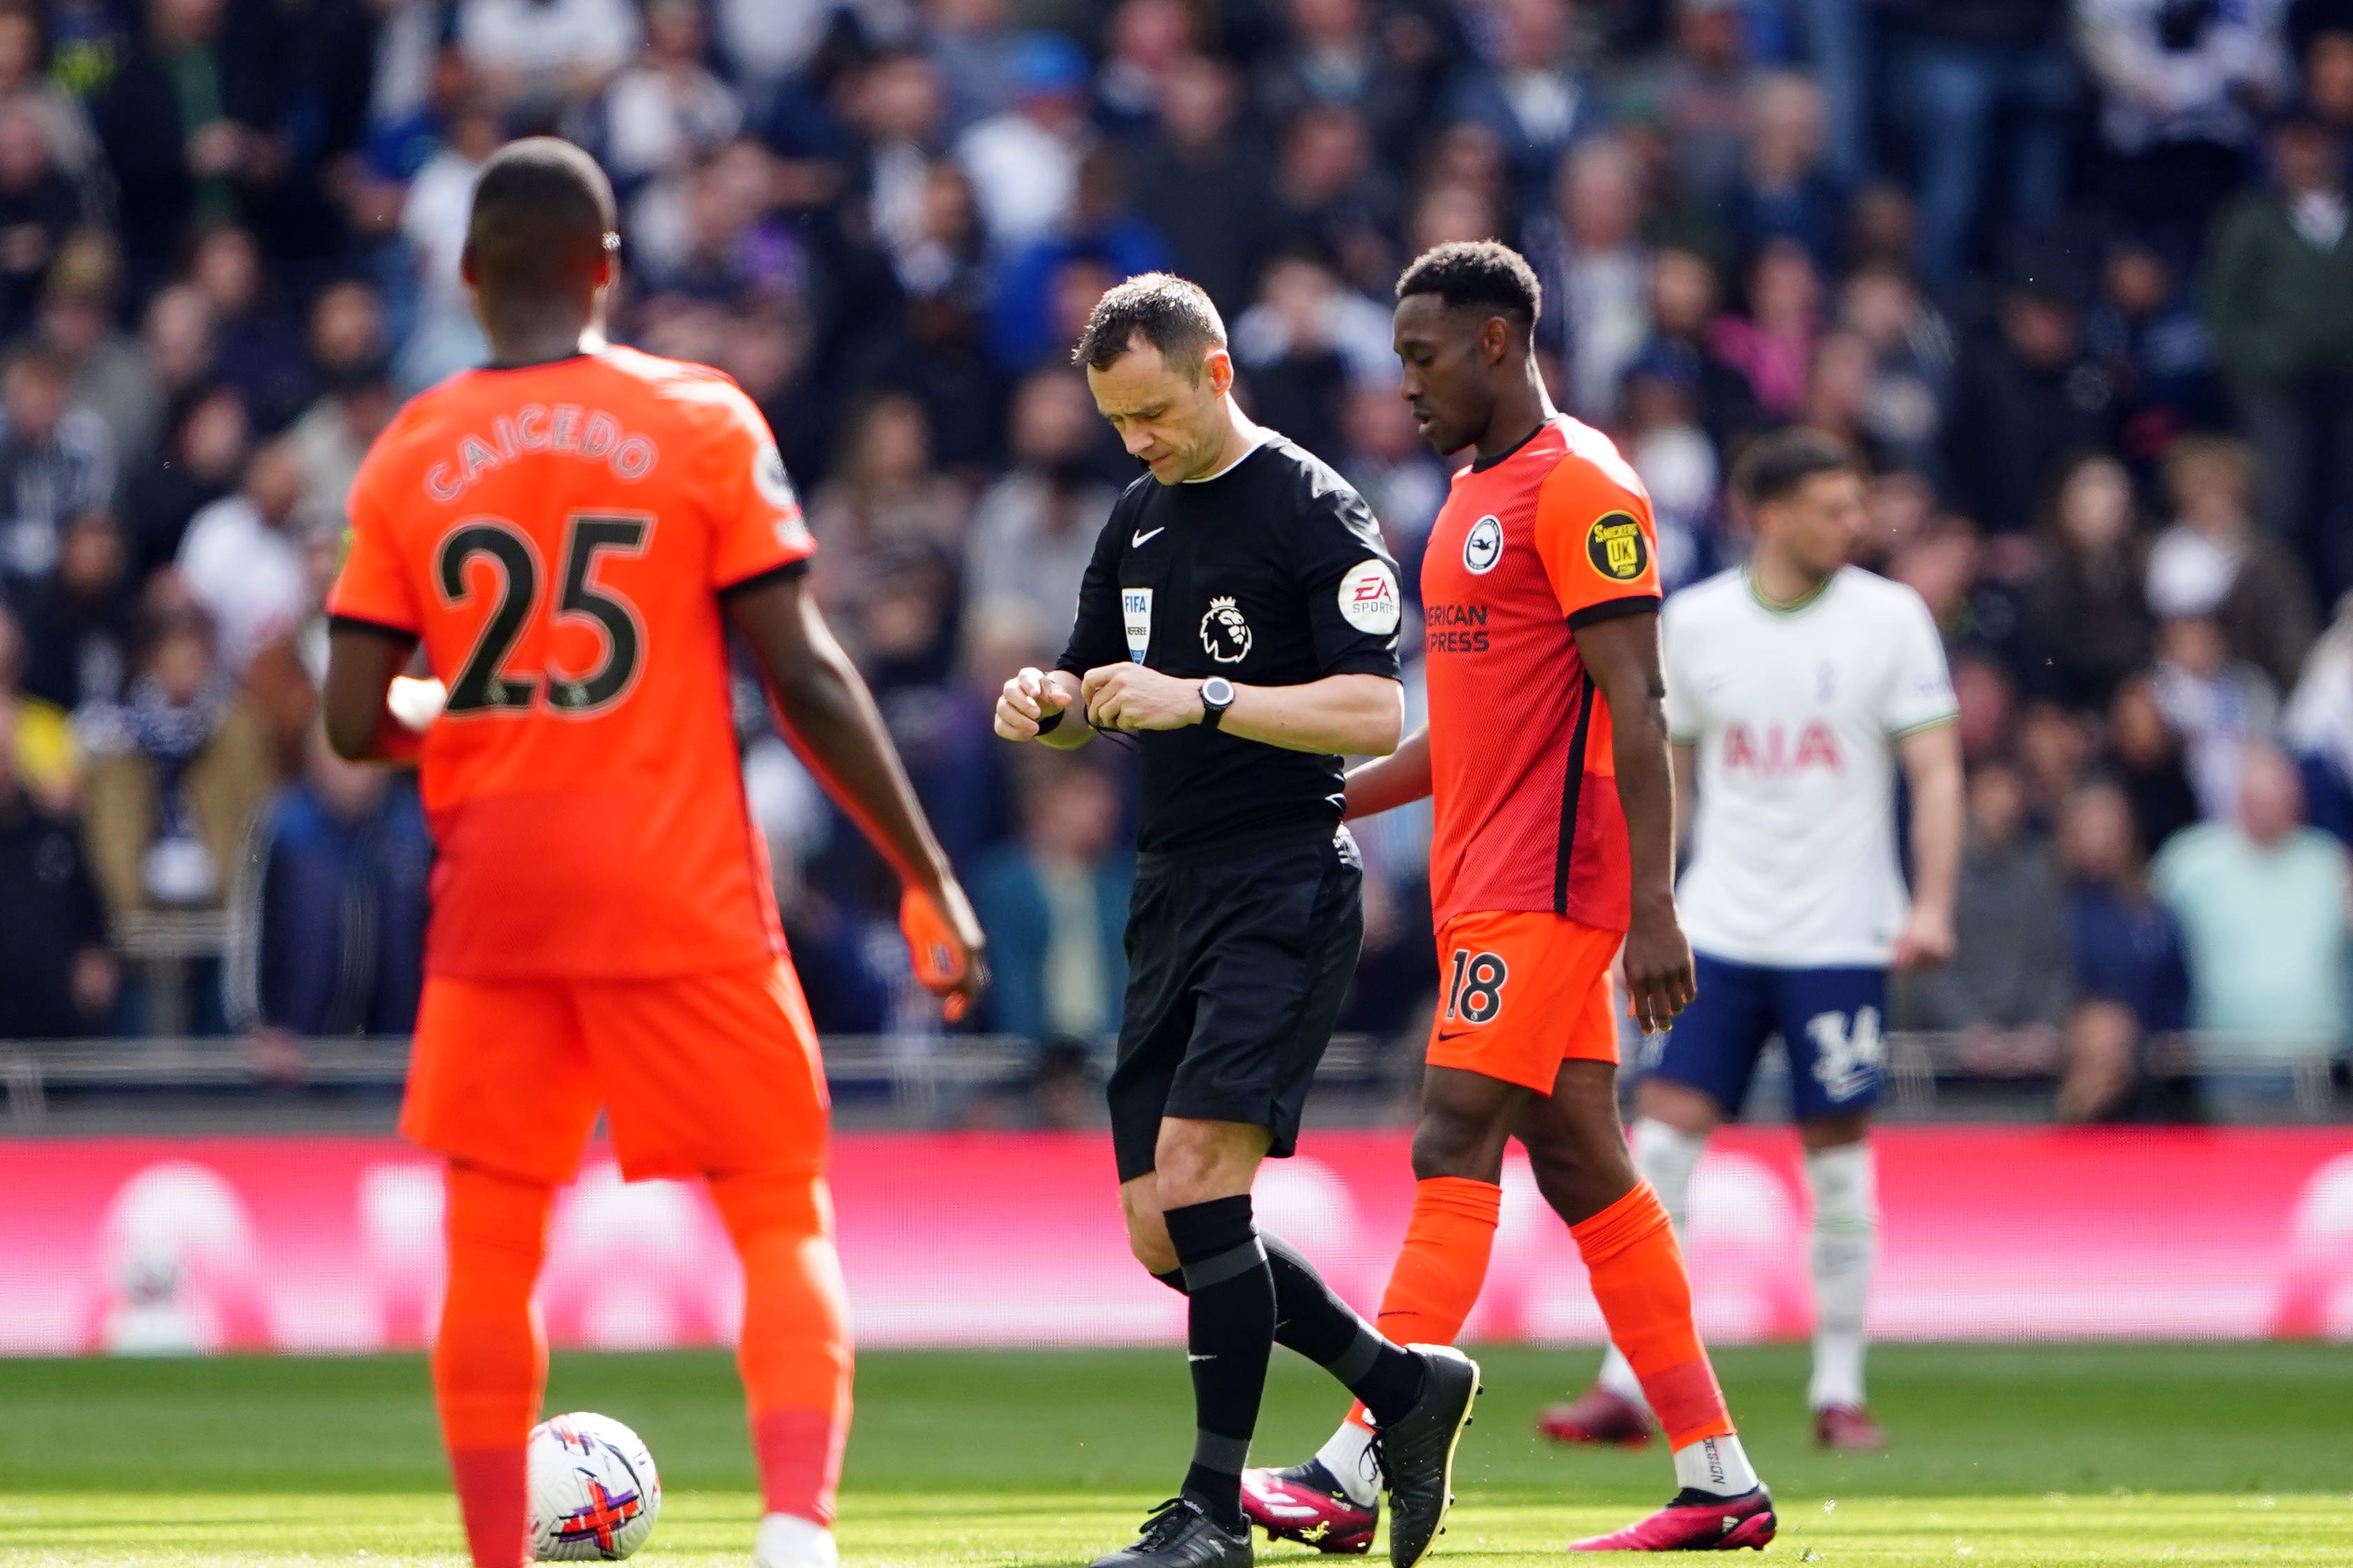 Brighton have received an apology from the PGMOL after referee Stuart Attwell failed to award them a penalty in a 2-1 defeat to Tottenham (Zac Goodwin/PA)